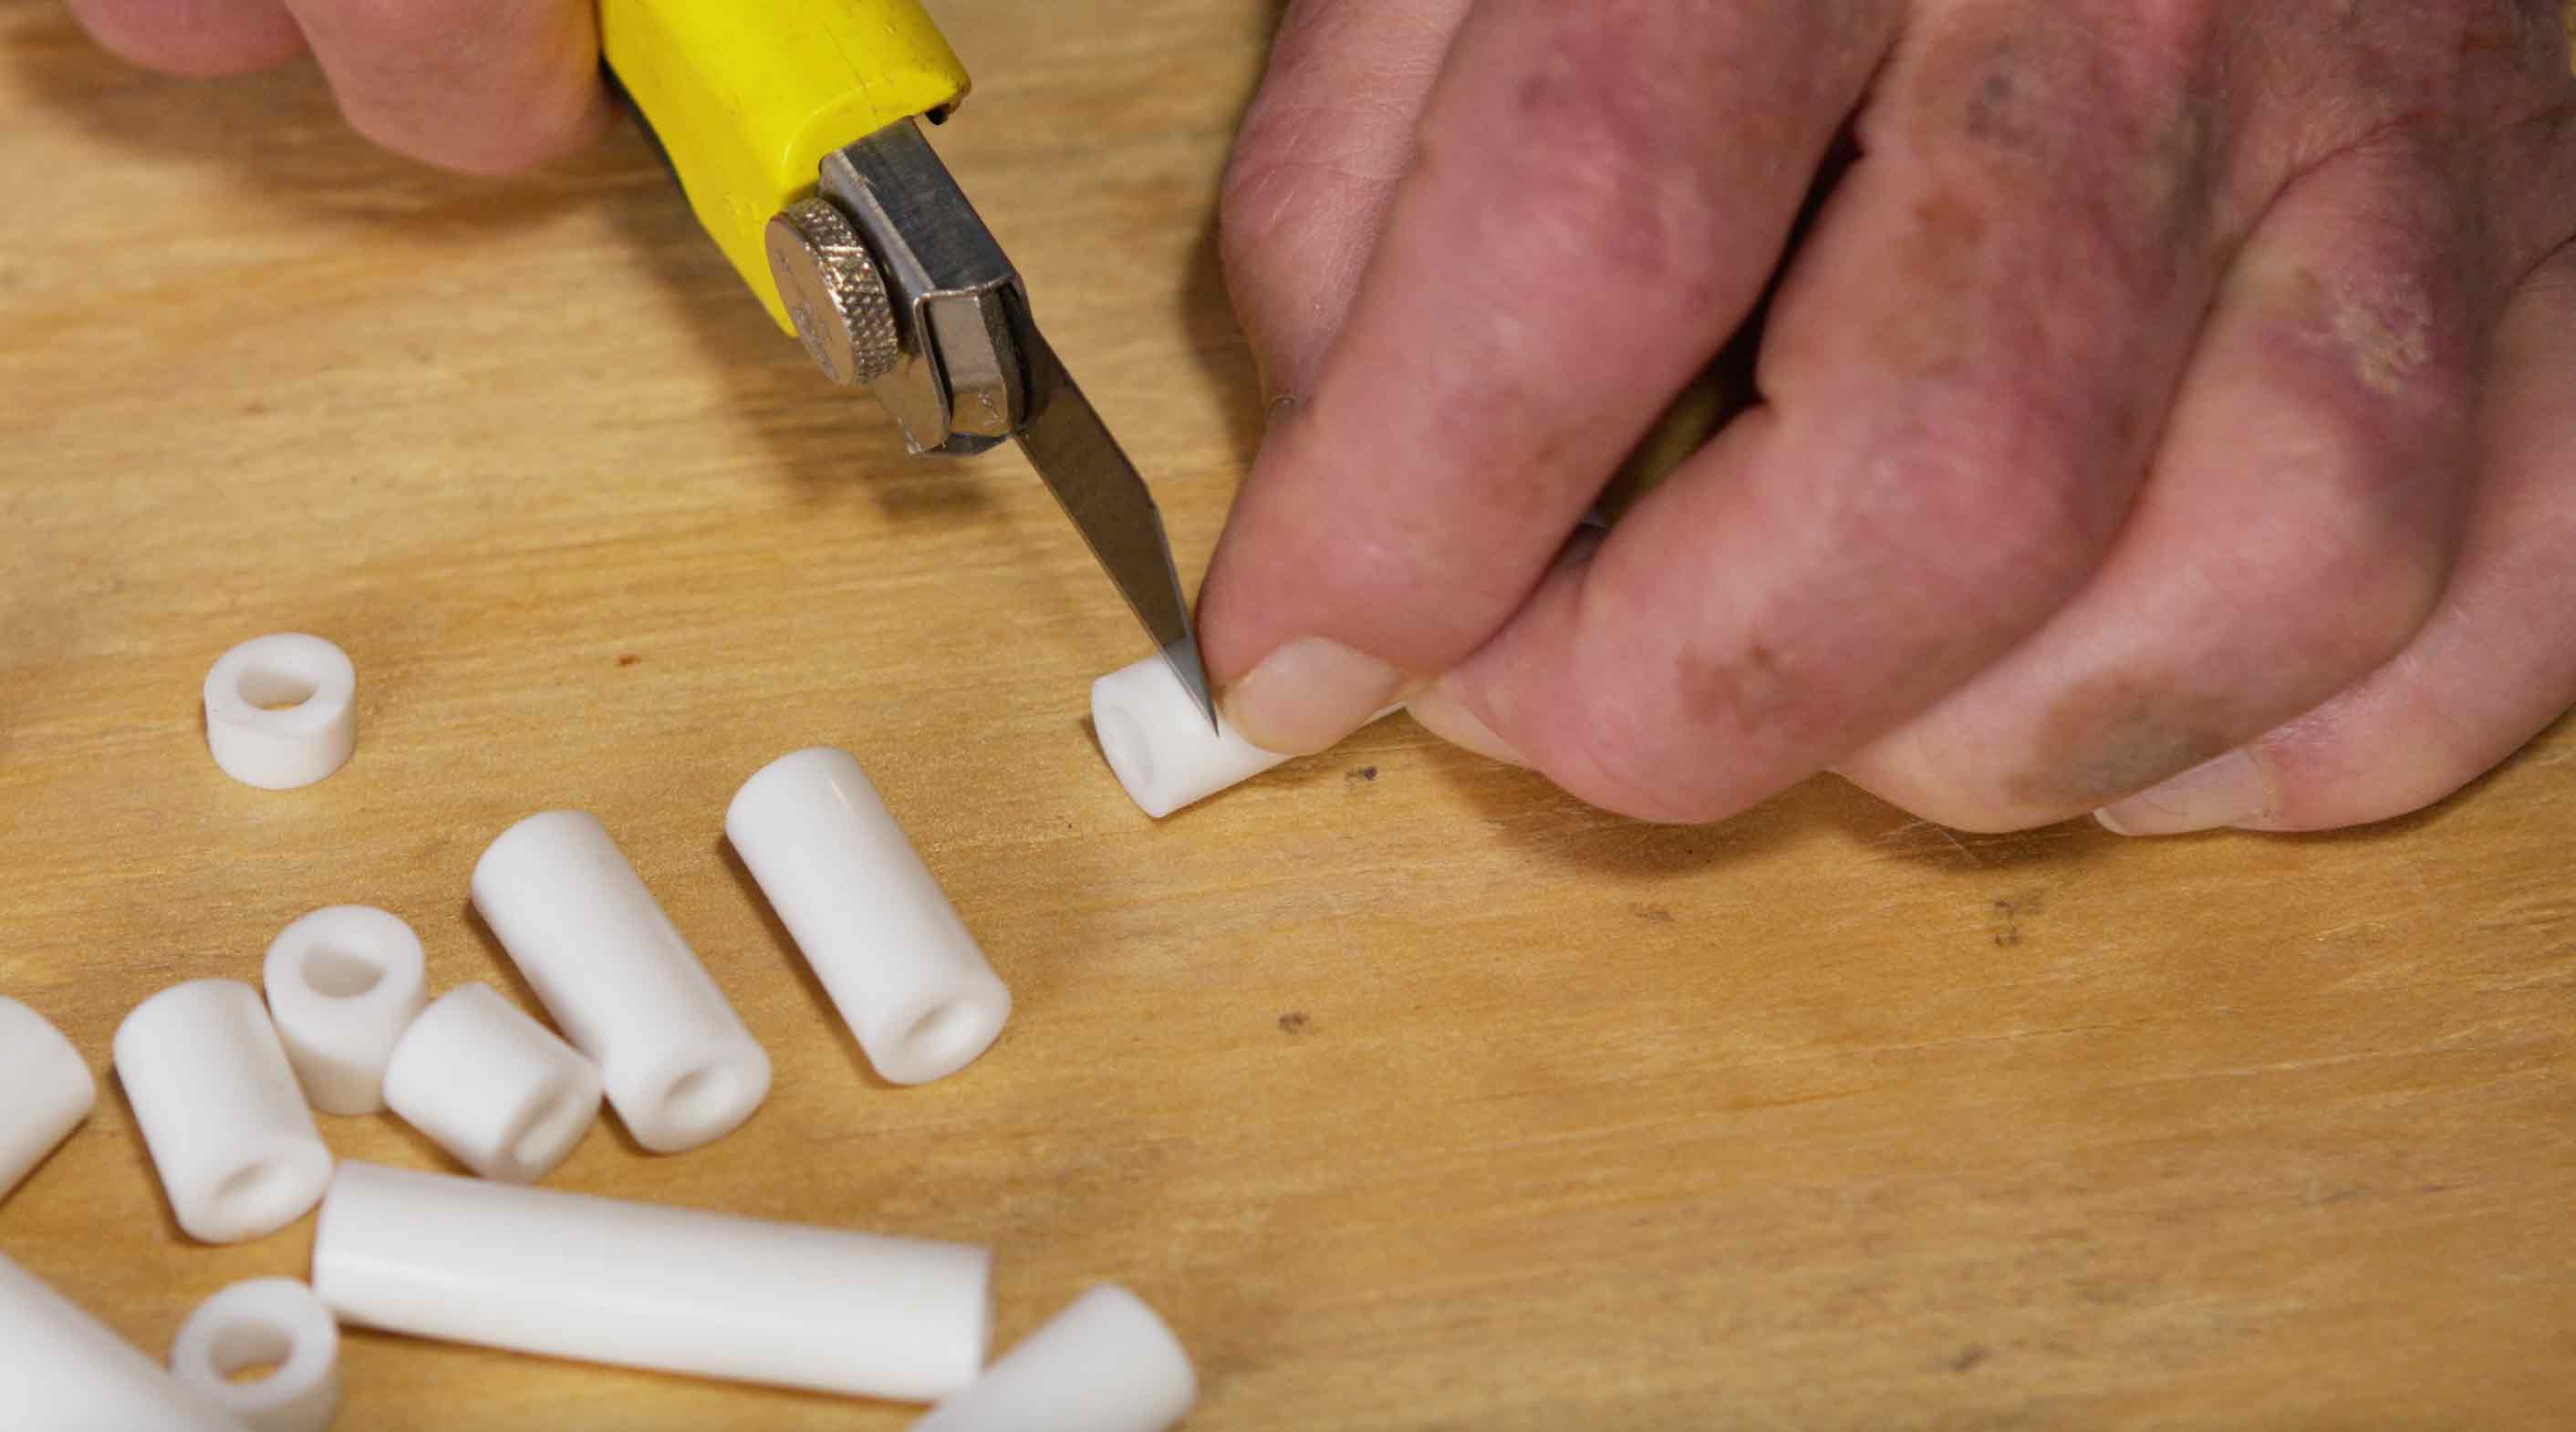 Man using utility knife to cut spacer for electrical outlet